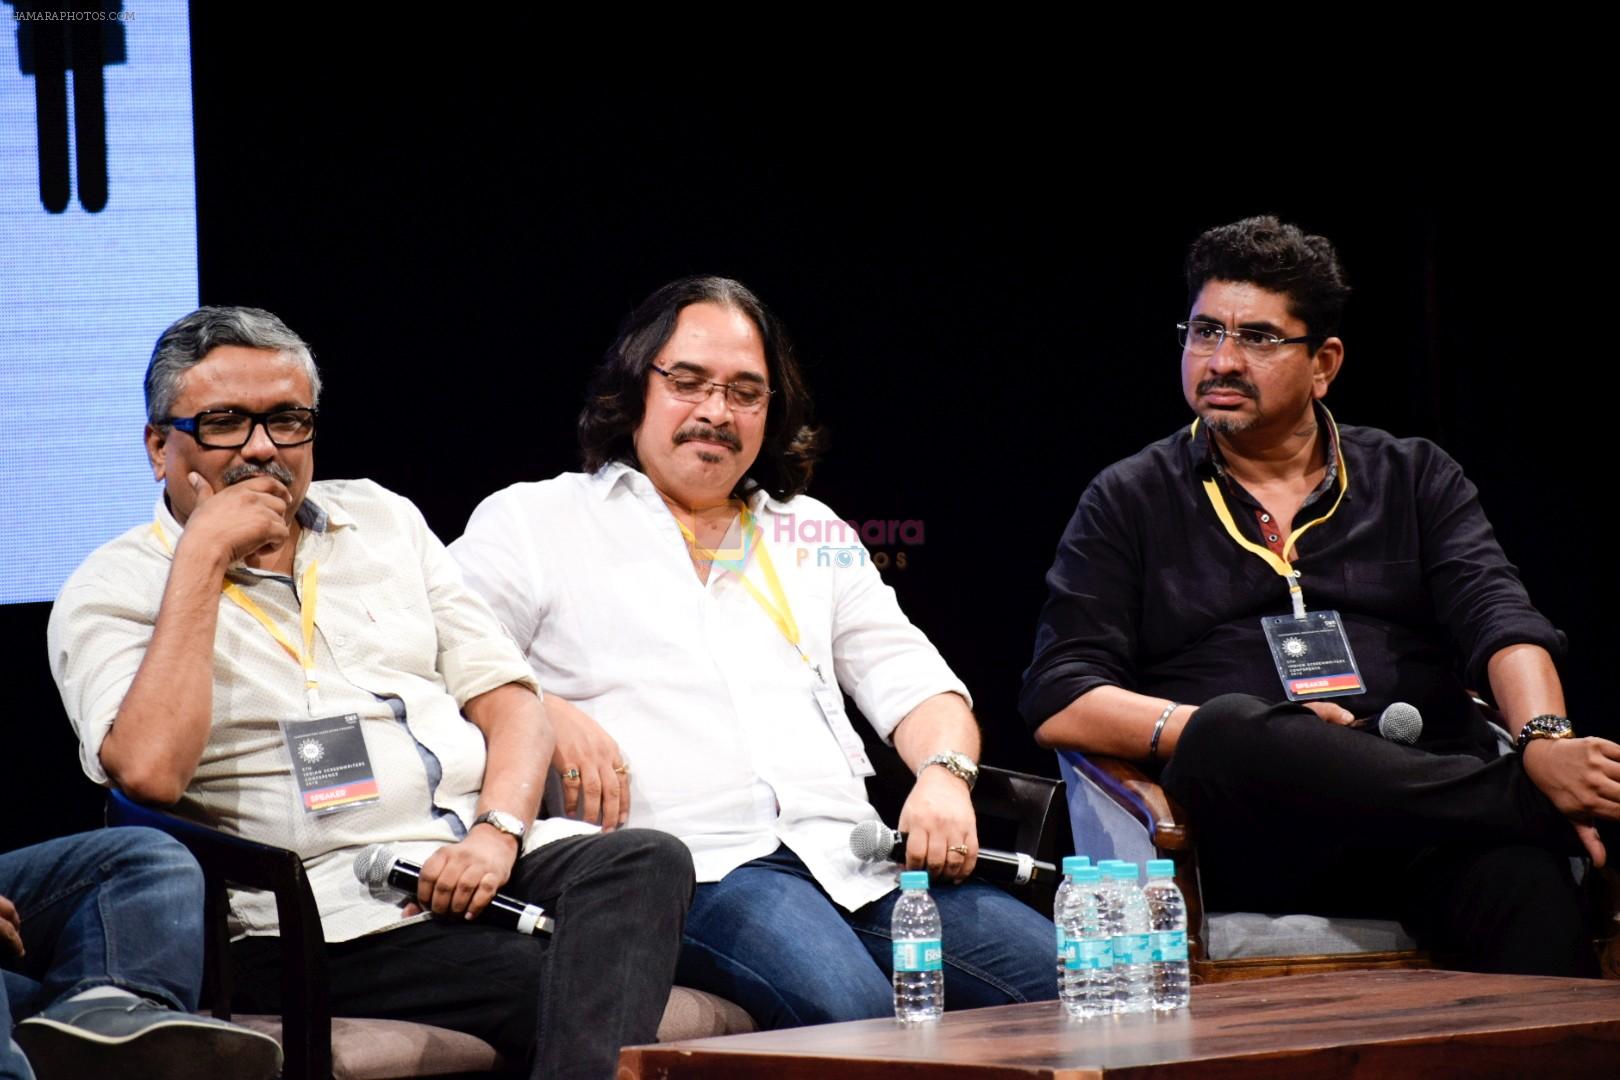 at 5th edition of Screenwriters conference in St Andrews, bandra on 3rd Aug 2018